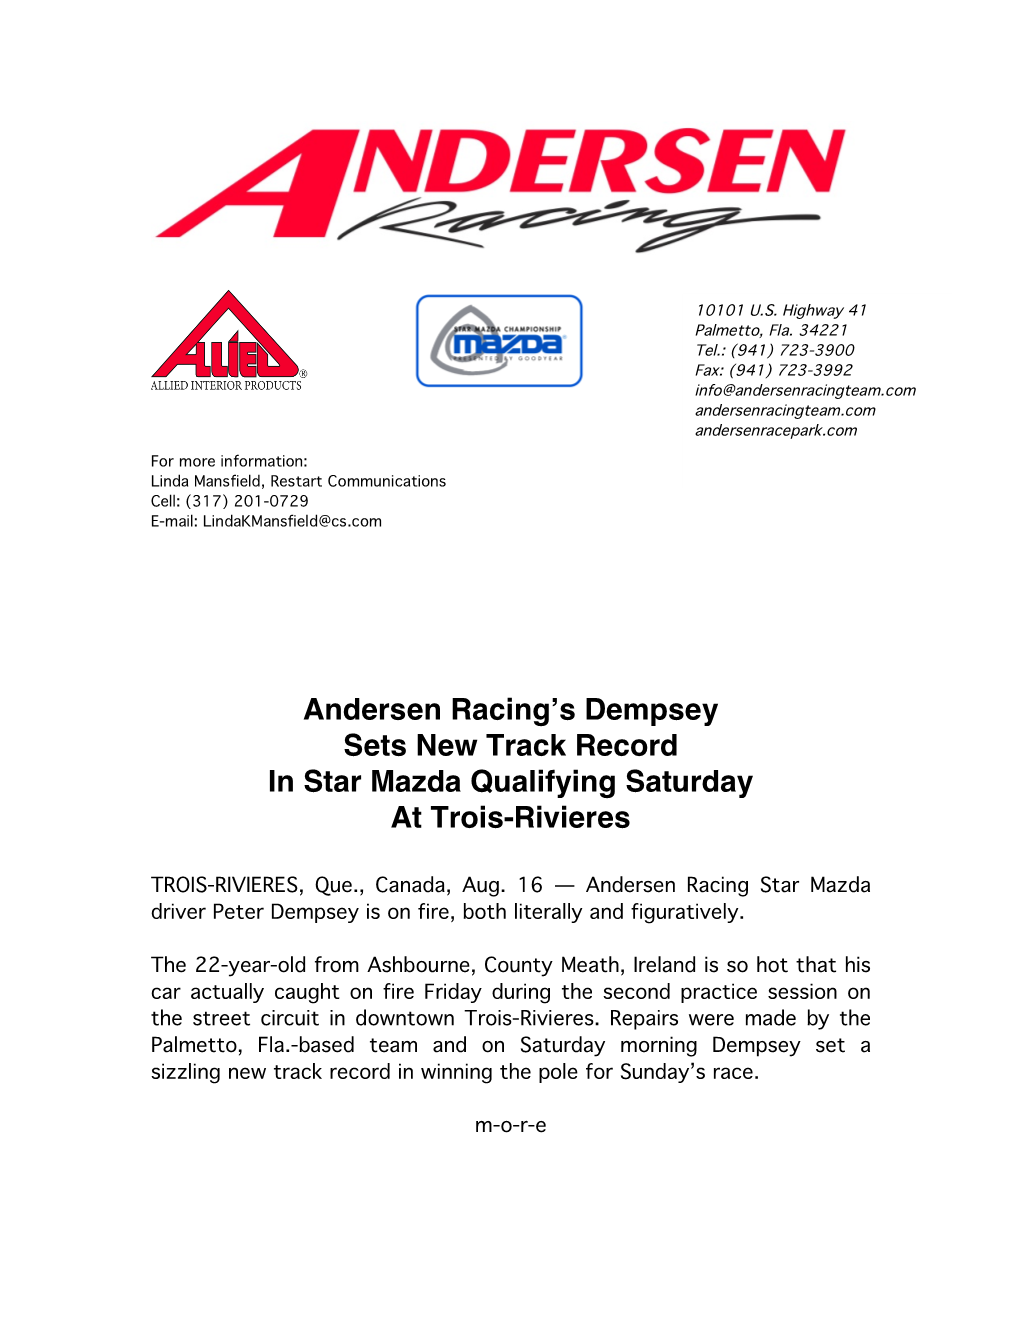 Andersen Racing's Dempsey Sets New Track Record in Star Mazda